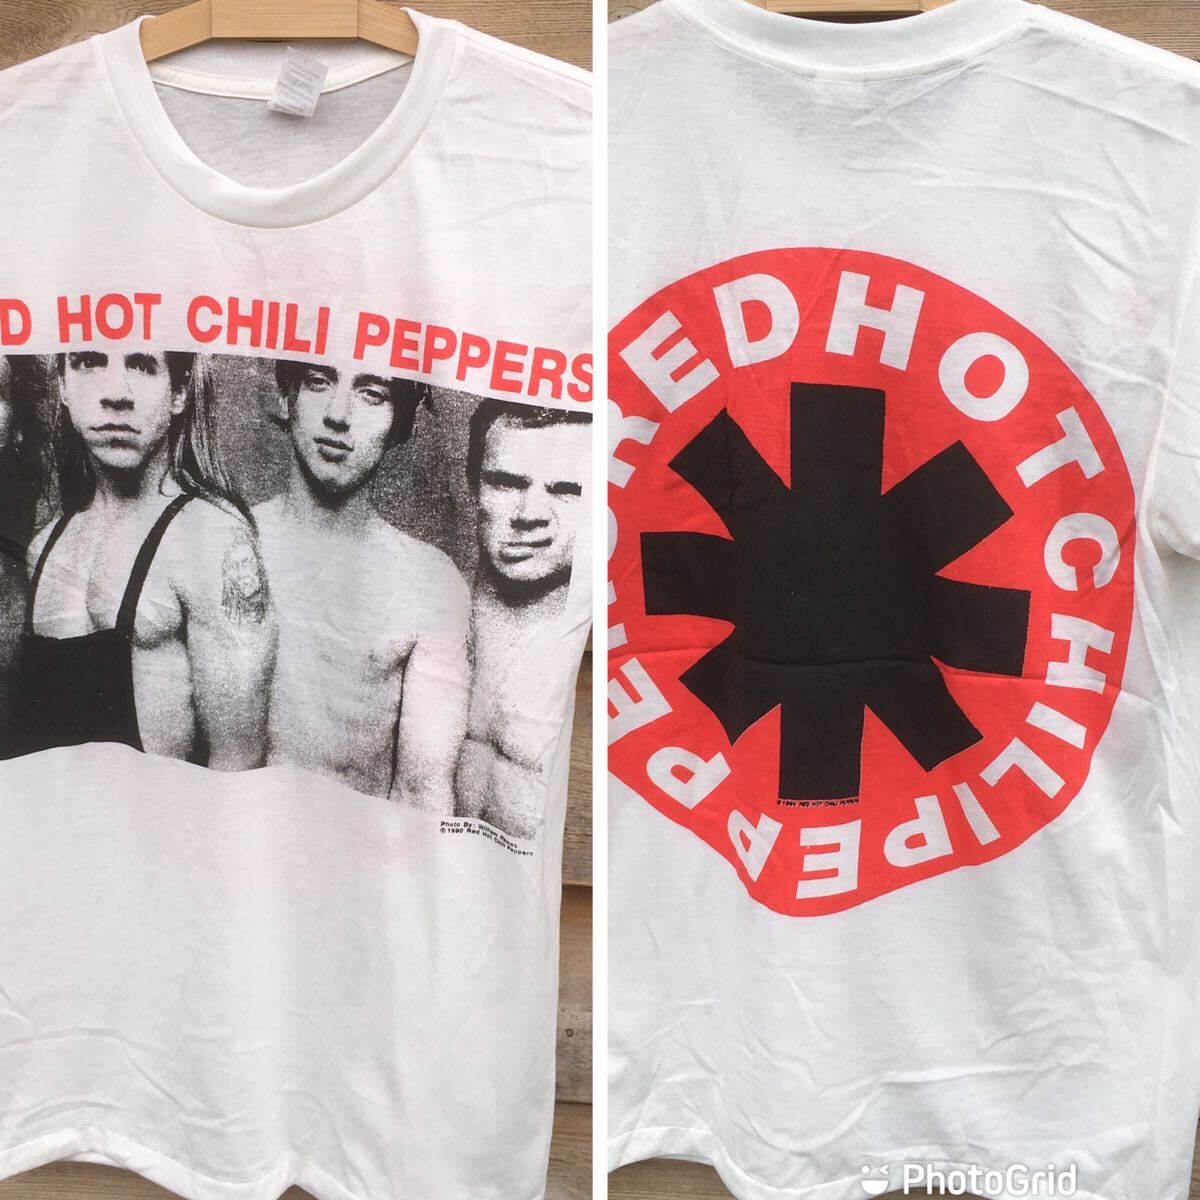 90 period band red hot Chile pepper zL band T-shirt lock T-shirt 